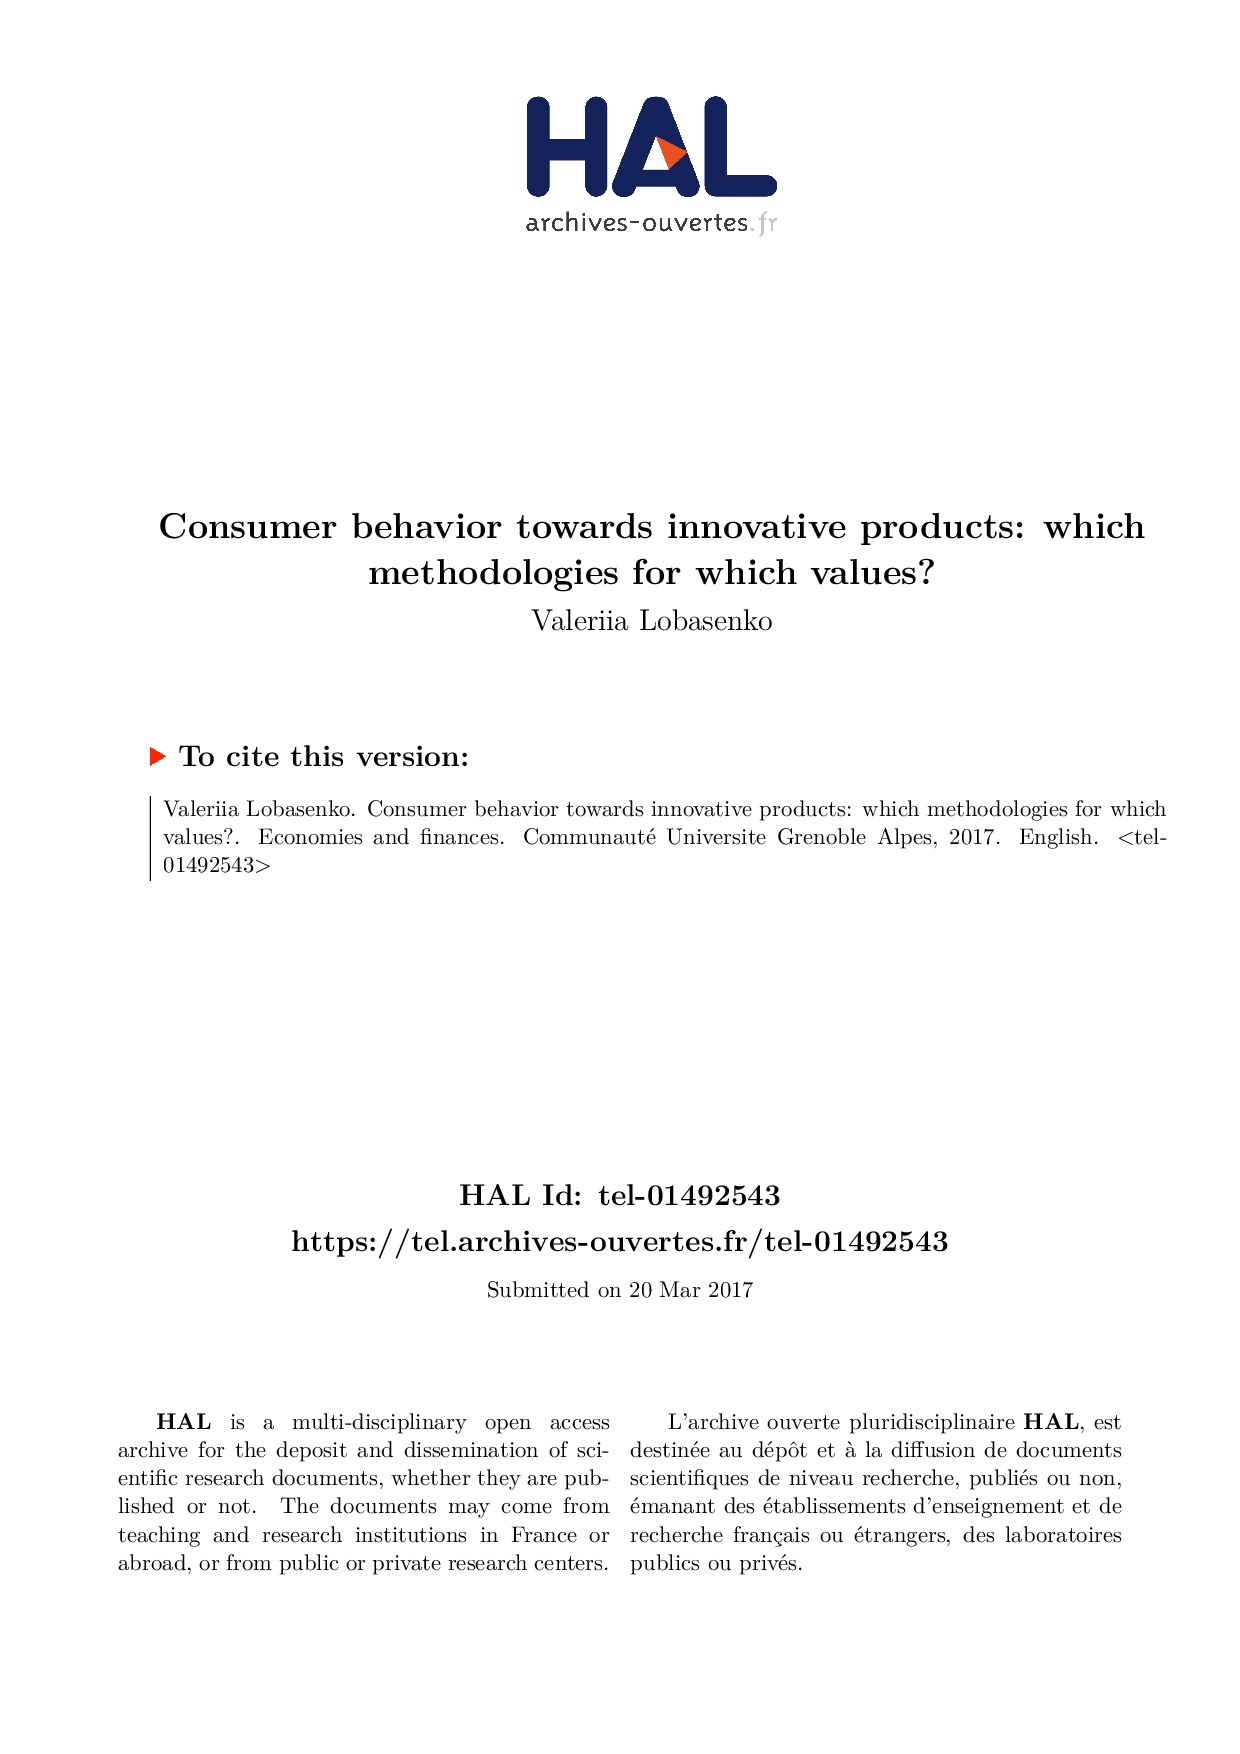 Consumer behavior towards innovative products: which methodologies for which values?